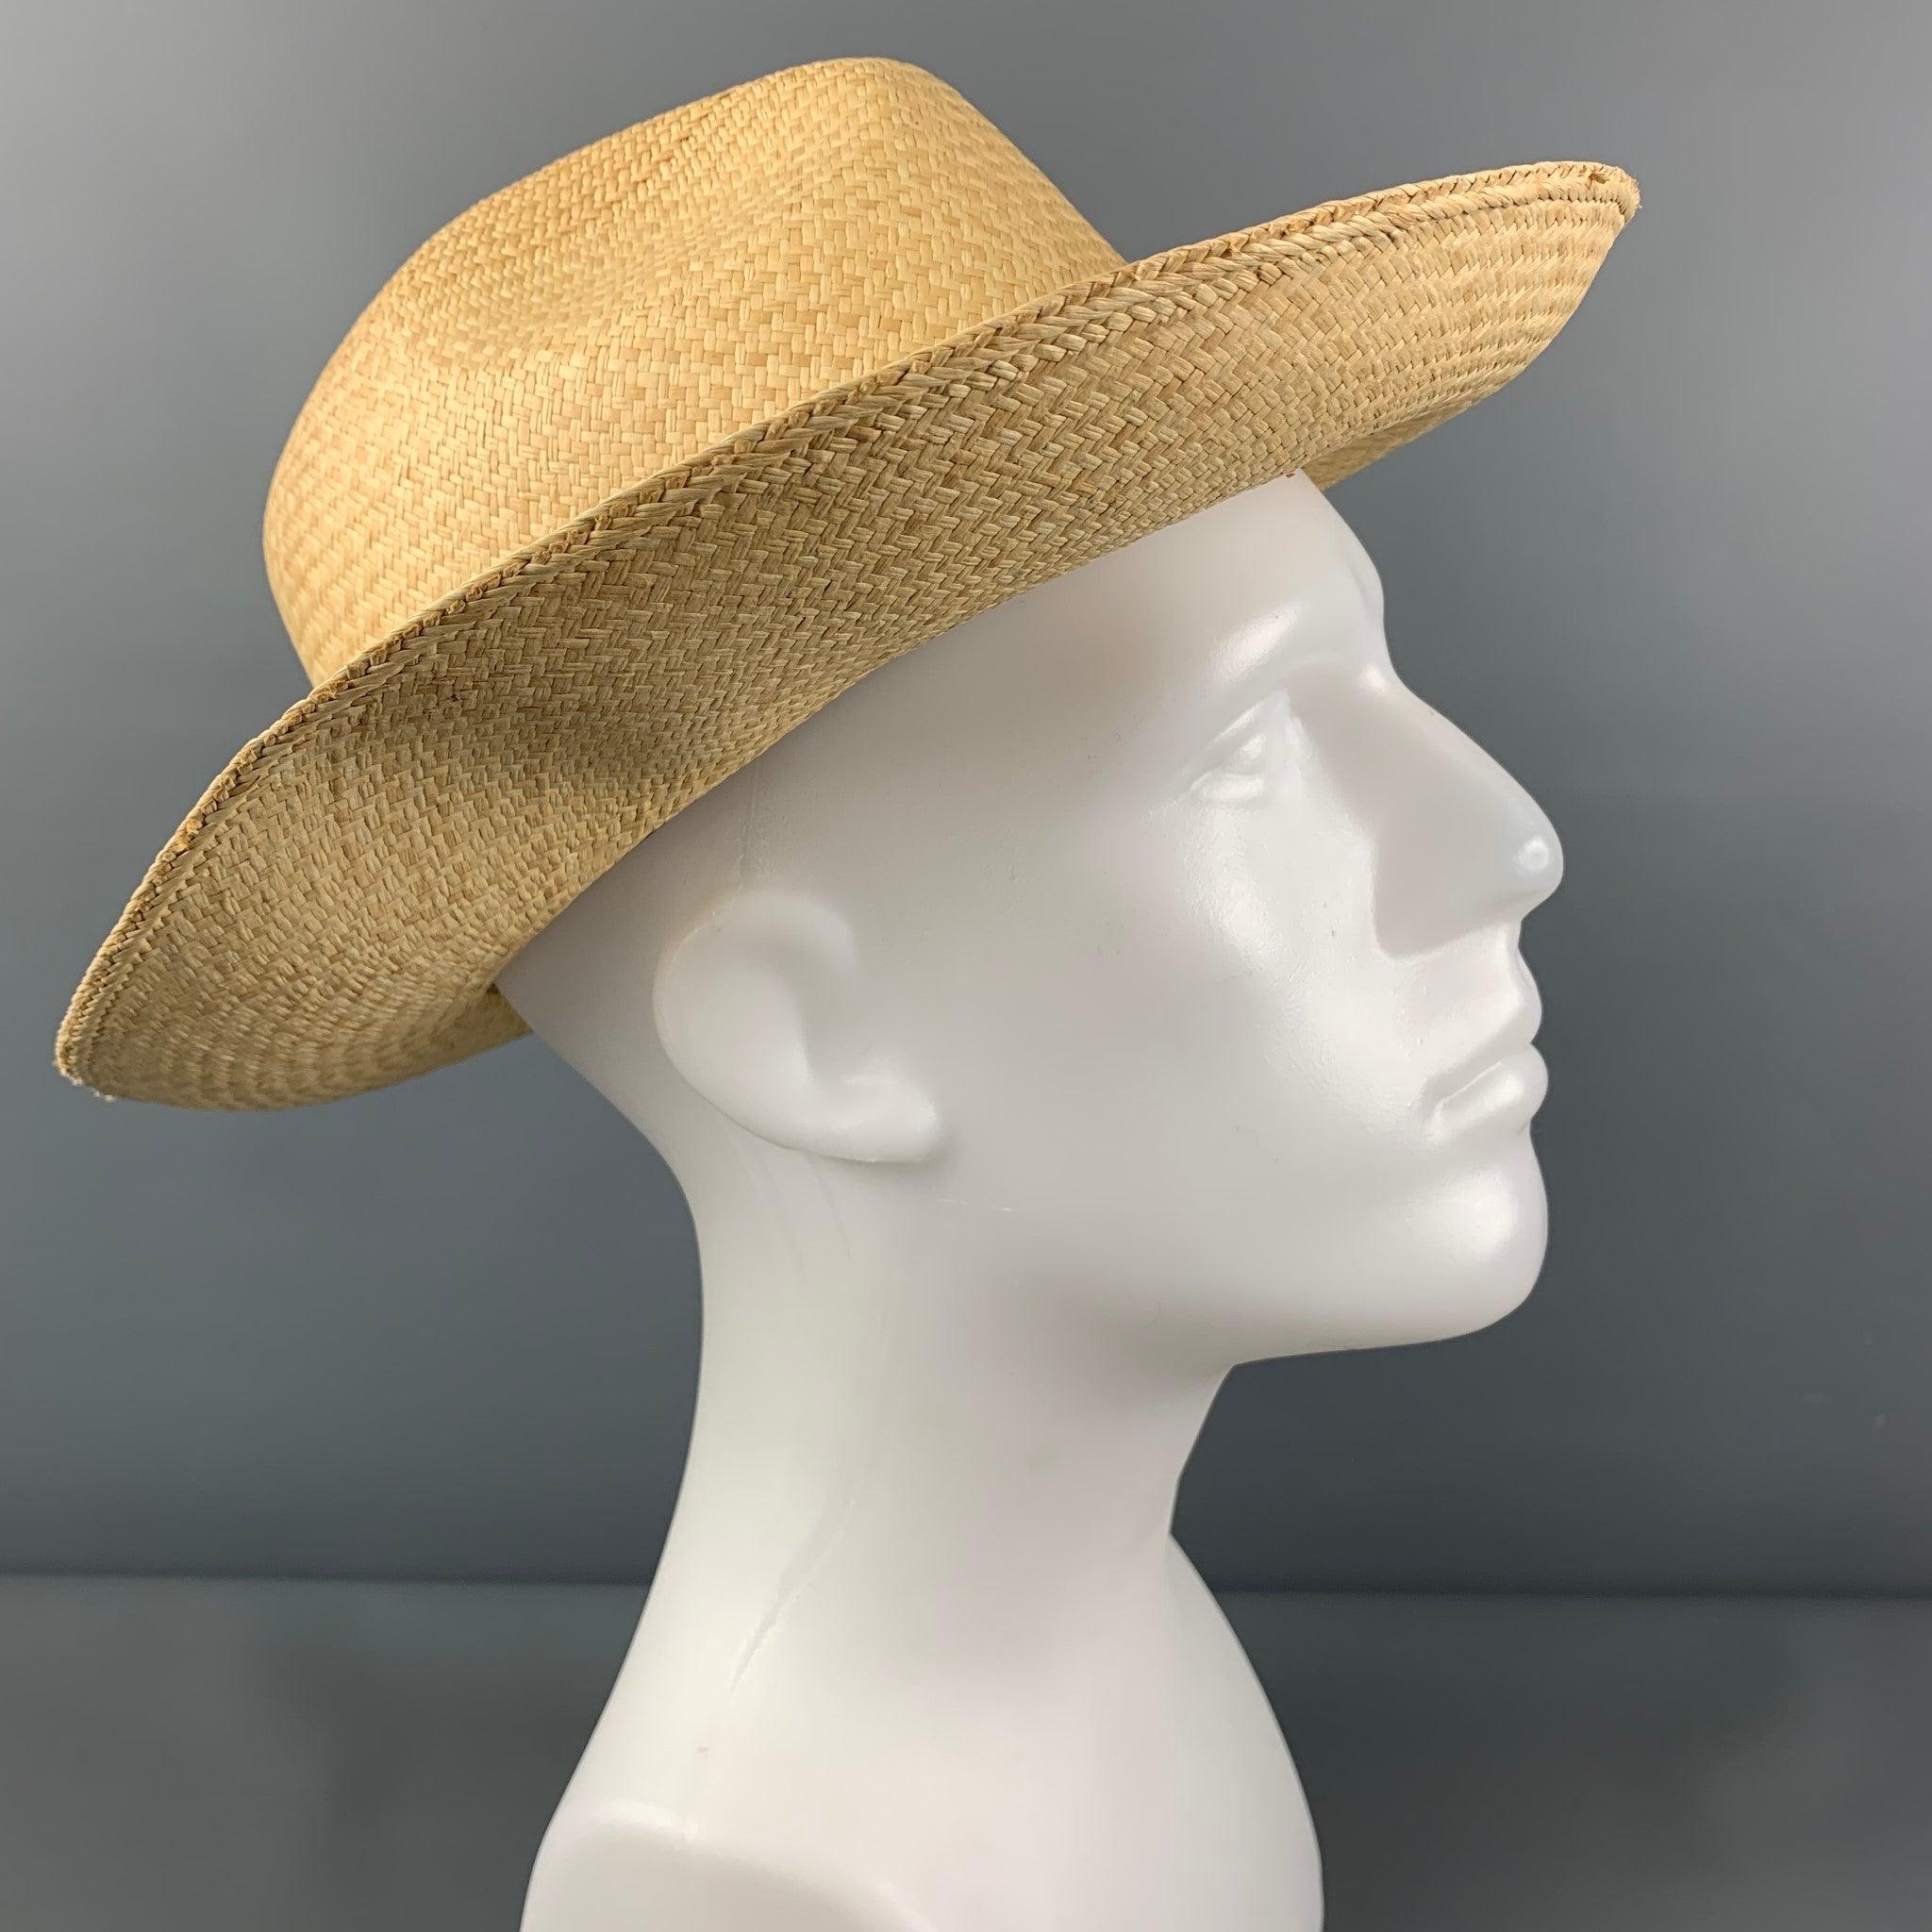 Vintage LOCK & CO HATTERS hat comes in a beige straw material featuring a ribbon trim. Made in England.
Very Good
Pre-Owned Condition. 

Marked:   57/7 

Measurements: 
  Opening: 21.5 inches  Brim: 3.25 inches  Height: 4 inches 
  
  
 
Reference: